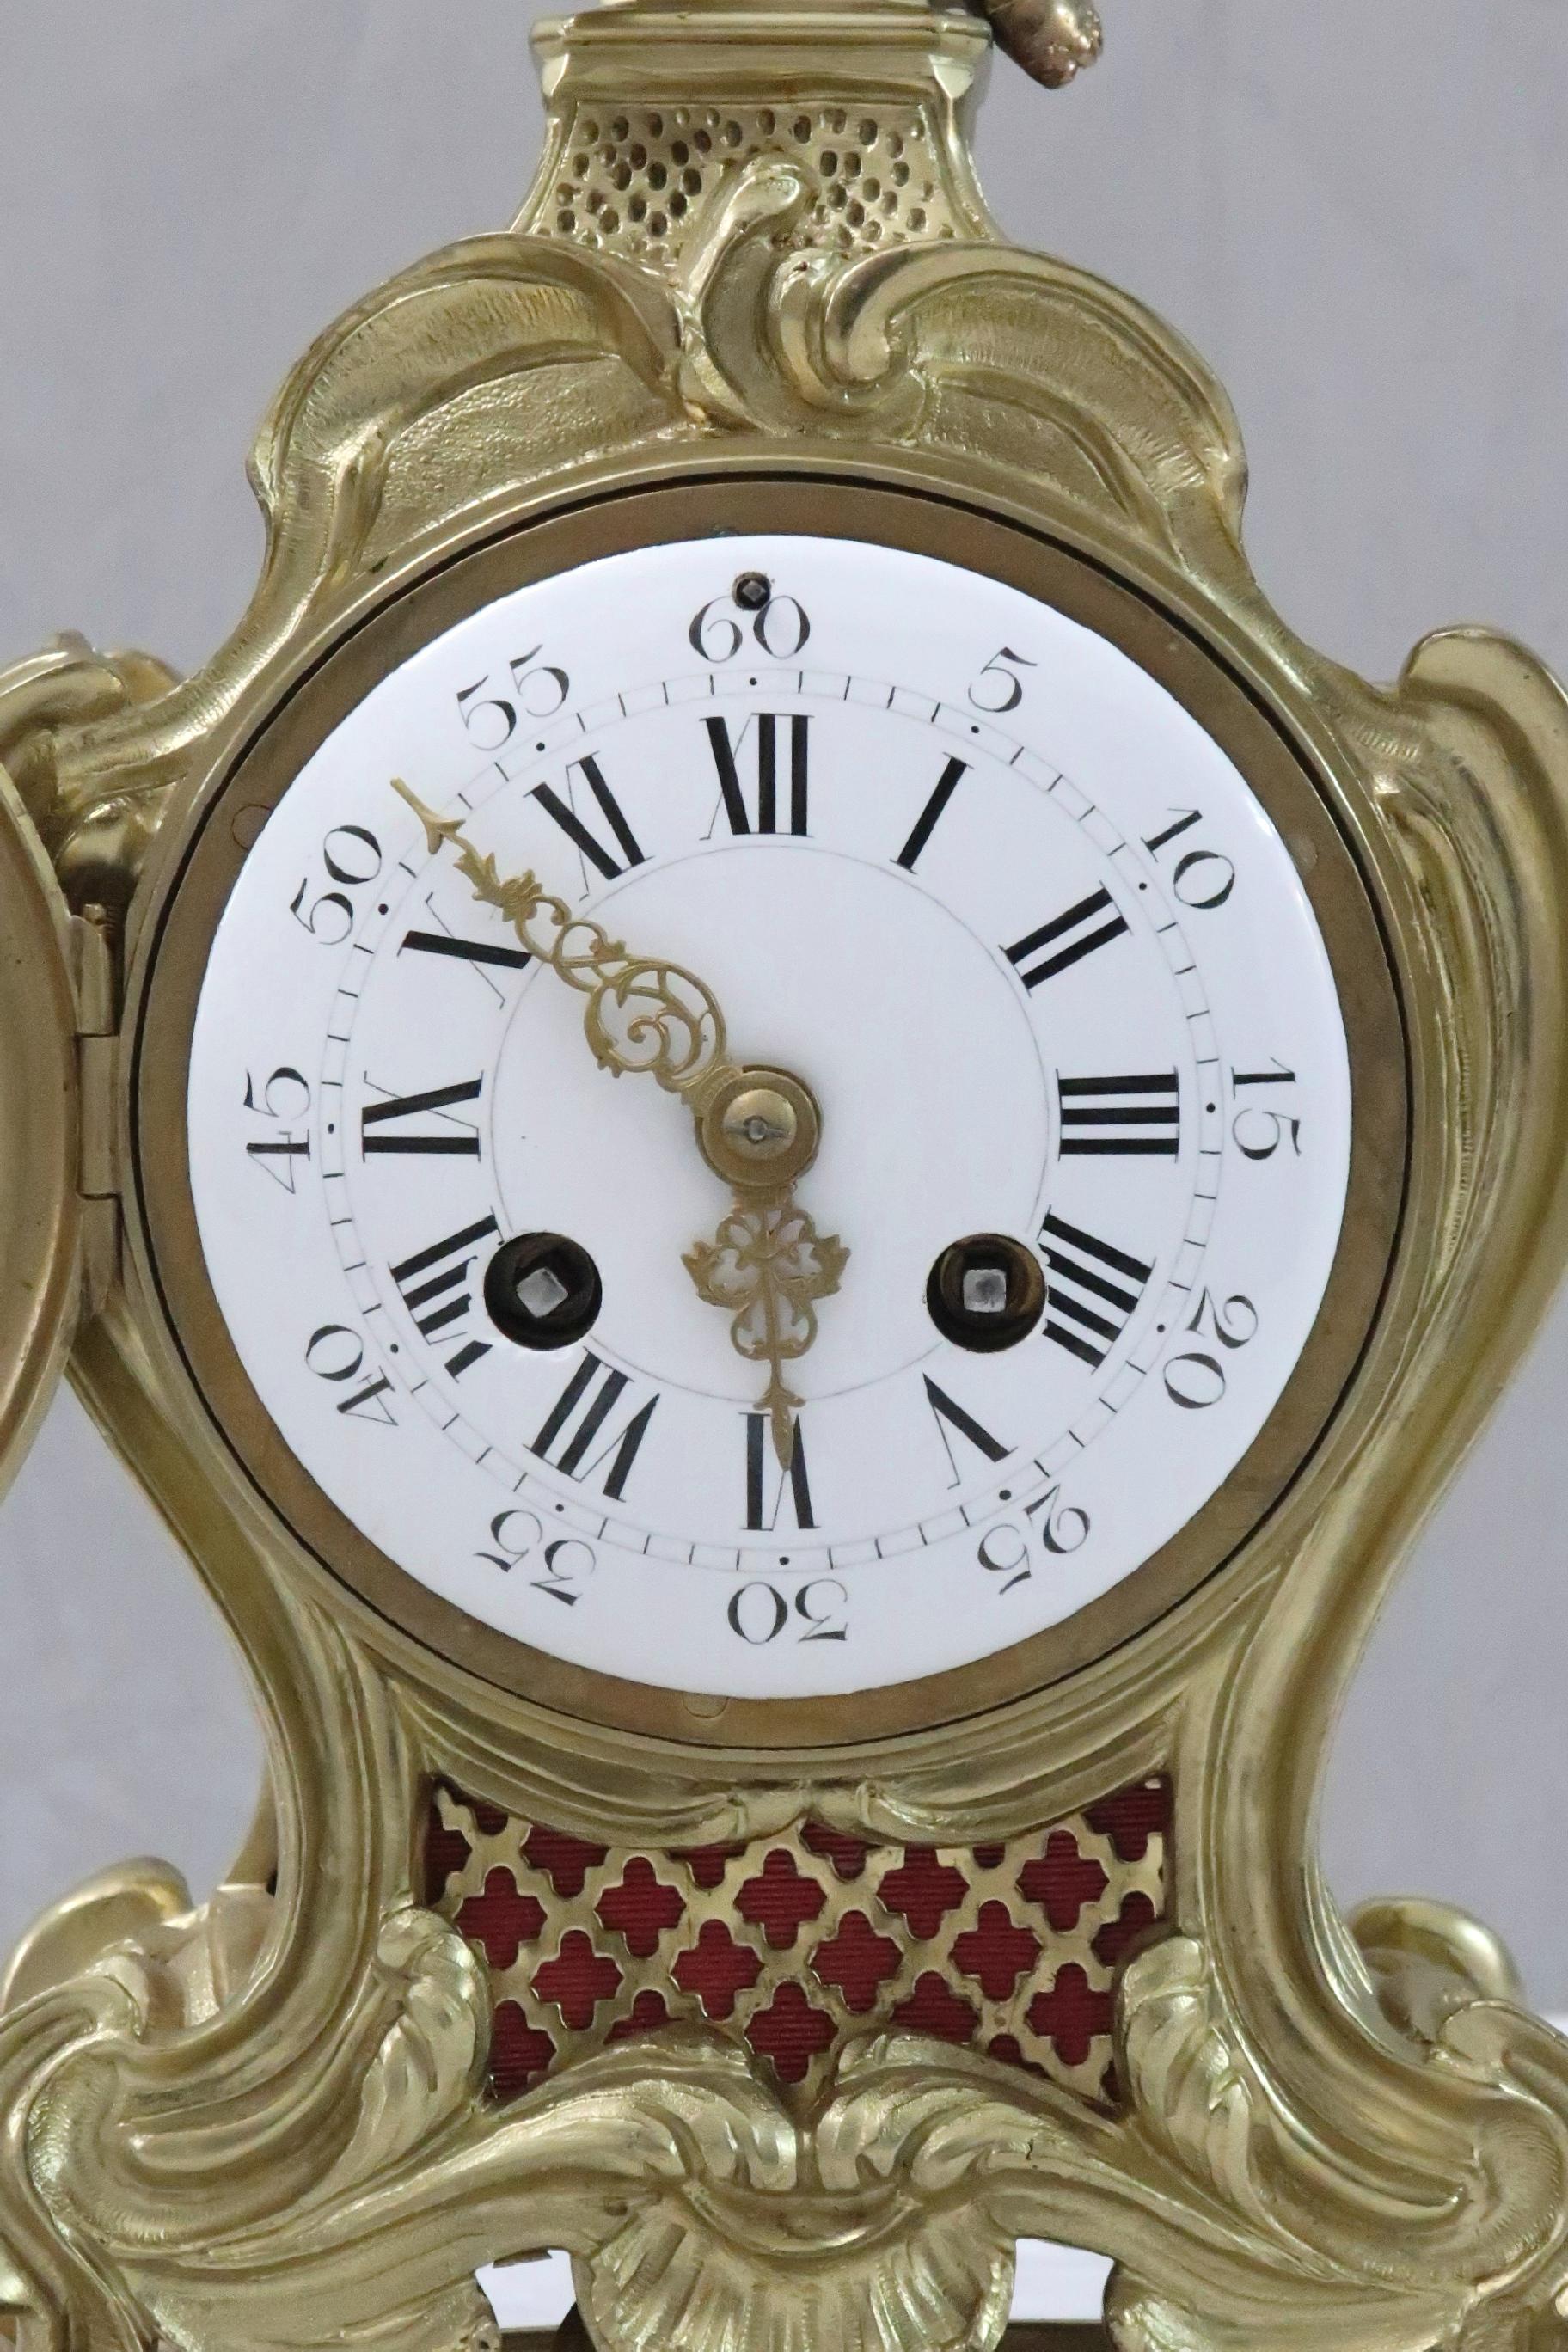 An excellent quality French 19th century serpentine shaped brass and gilt Rococo style mantel clock on stand with floral leaf decoration and cherub finial. The clock has a white enamel dial with a French eight day movement with outside count wheel